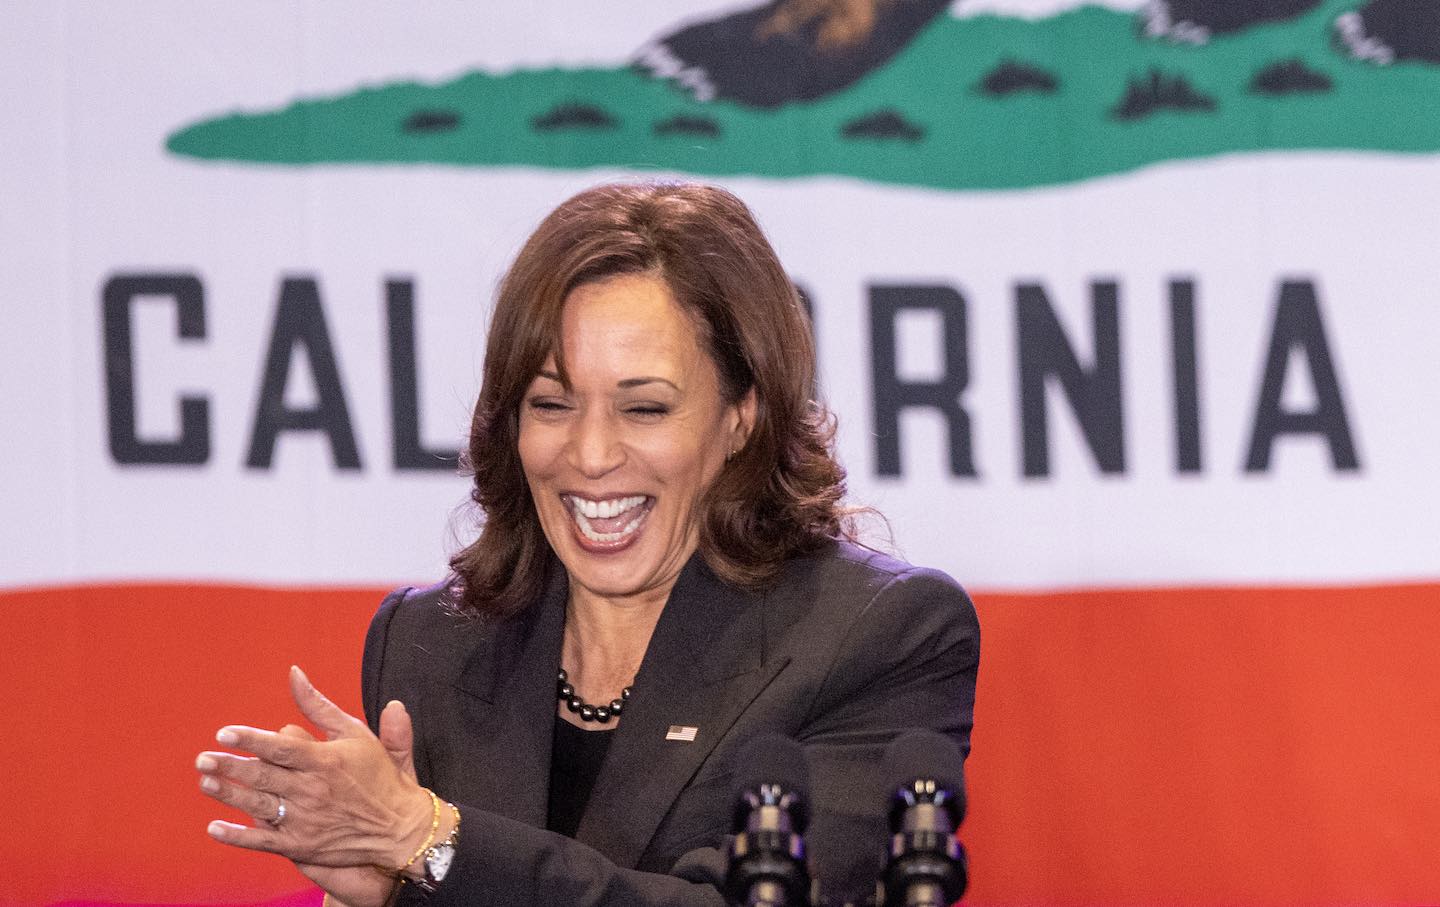 Vice President Kamala Harris campaigns for Democrats and Los Angeles mayoral candidate Representative Karen Bass at a Get Out the Vote event on the campus of UCLA on the eve of Election Day on November 7, 2022, in Los Angeles, California.